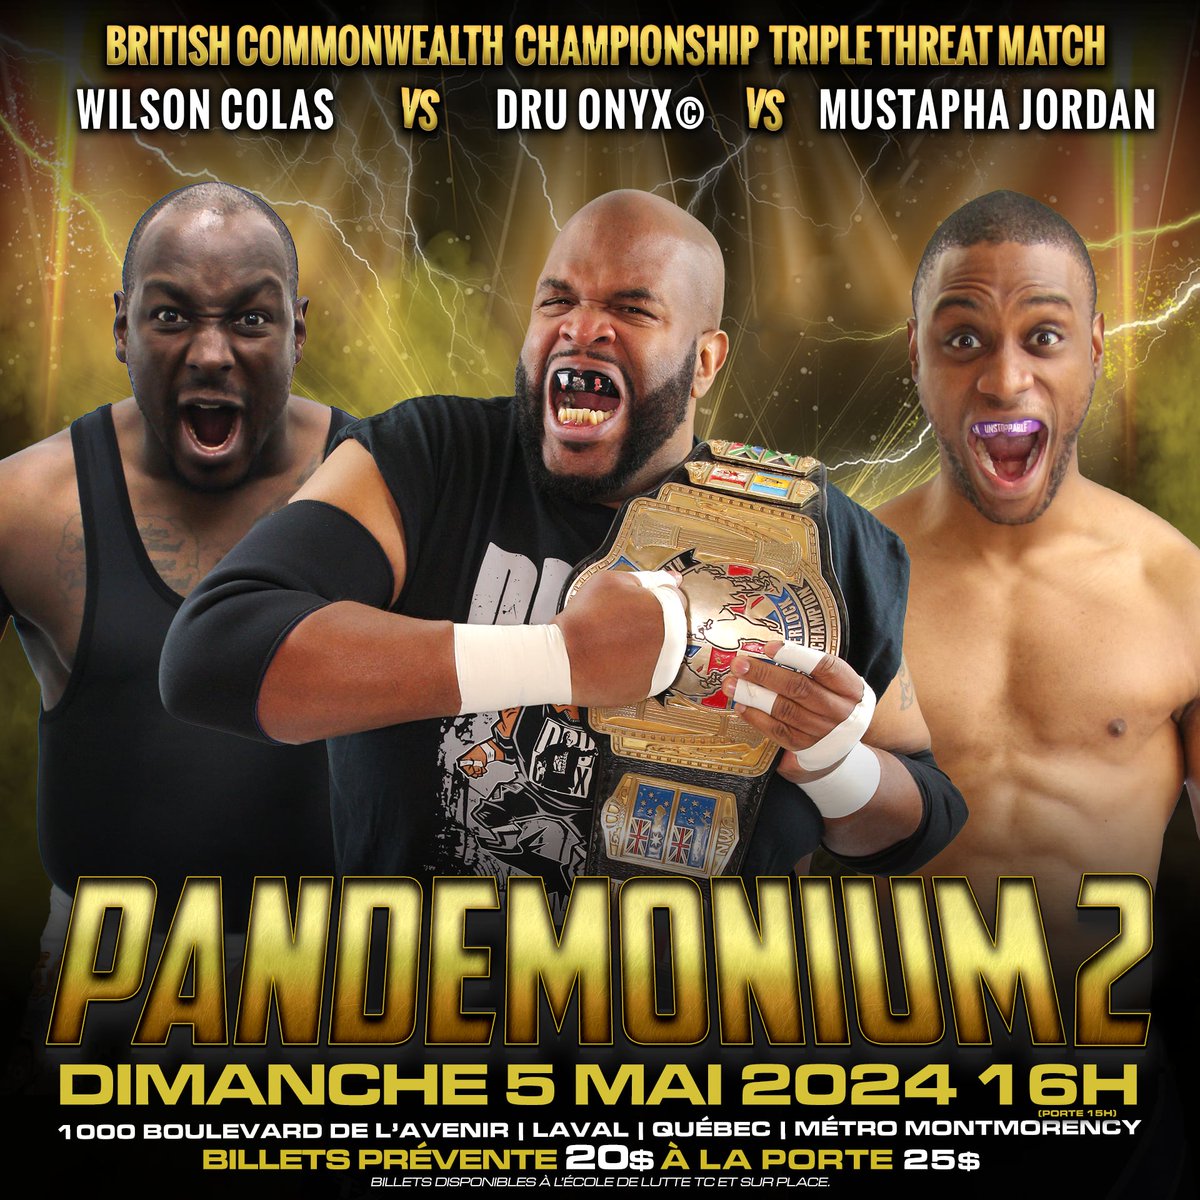 British Commonwealth Champion Dru Onyx will defend against Wilson Colas & Mustapha Jordan from Chocolate City in a Triple Threat Match at Pandemonium 2. Would the pursuit of a world title cause problems internally for the tag team, and overall ruin the friendship of all three?